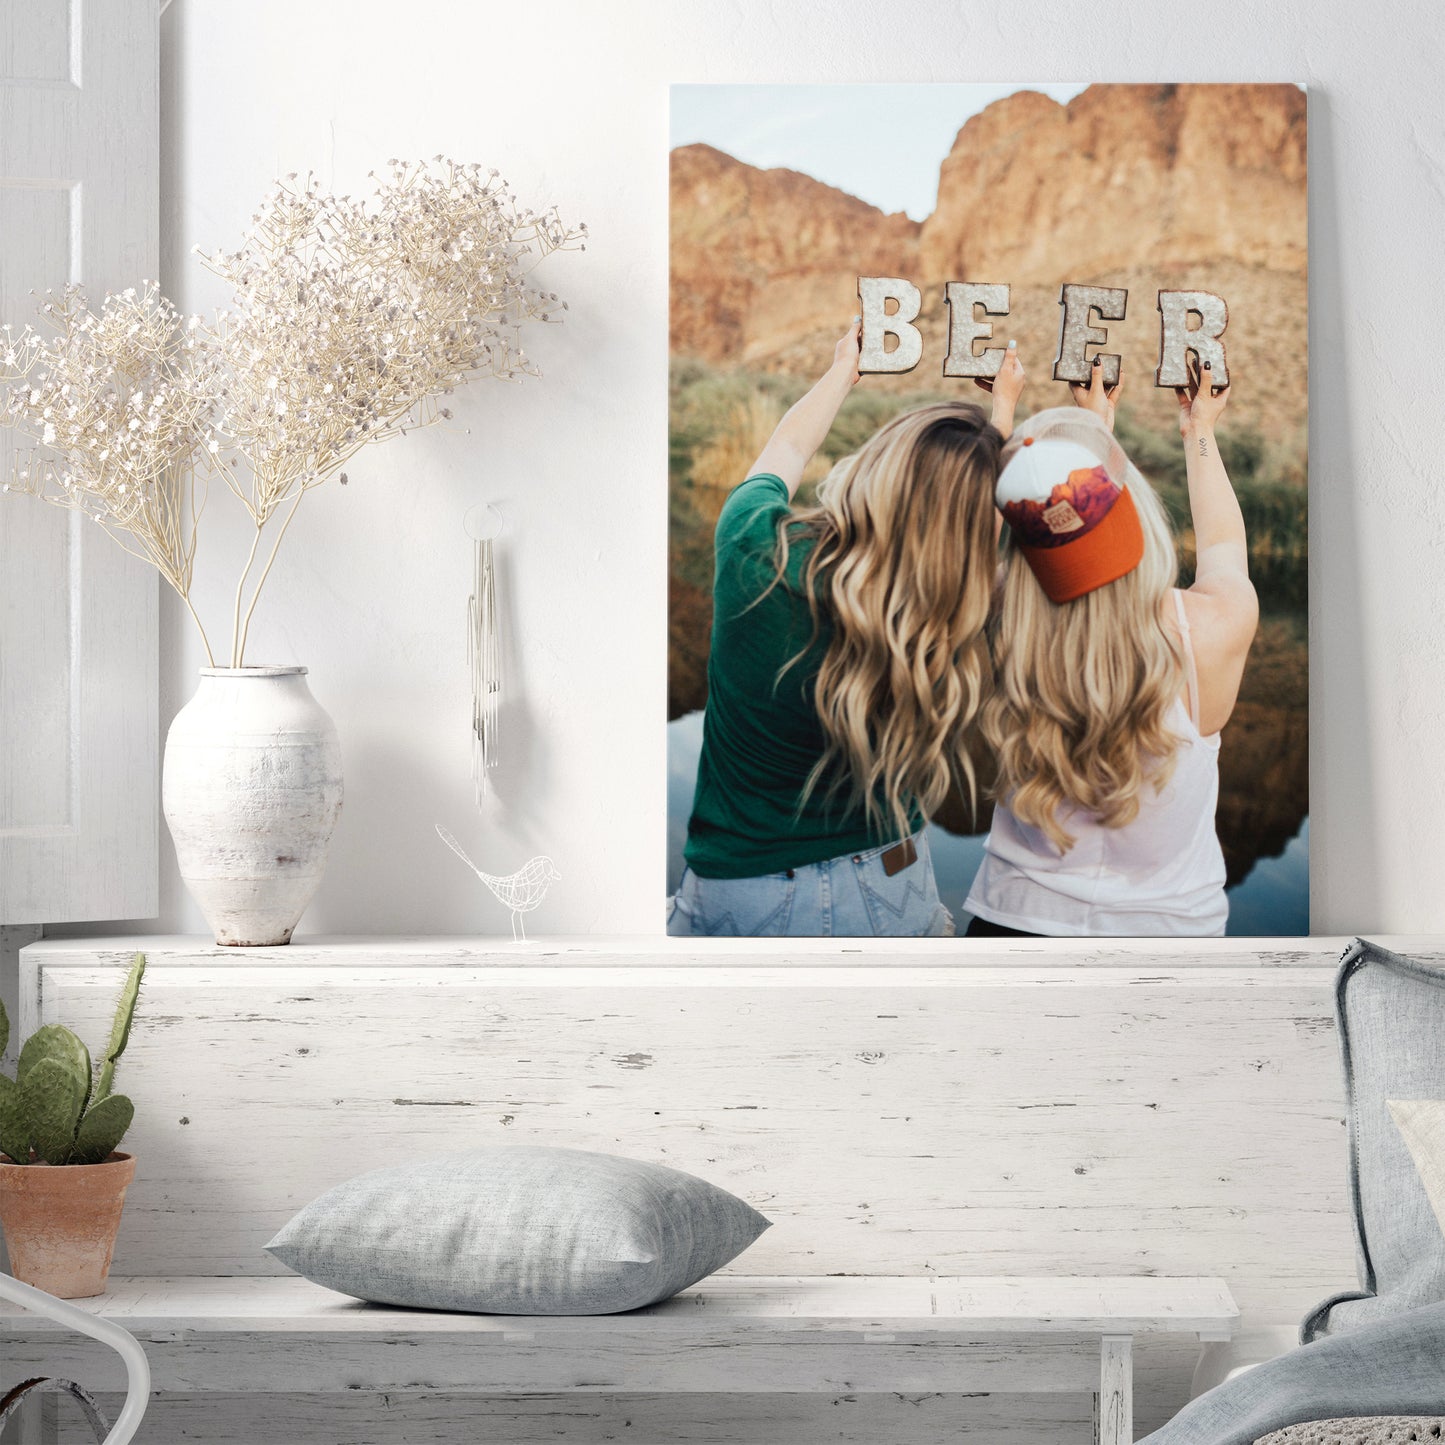 Best Friends Photo on canvas